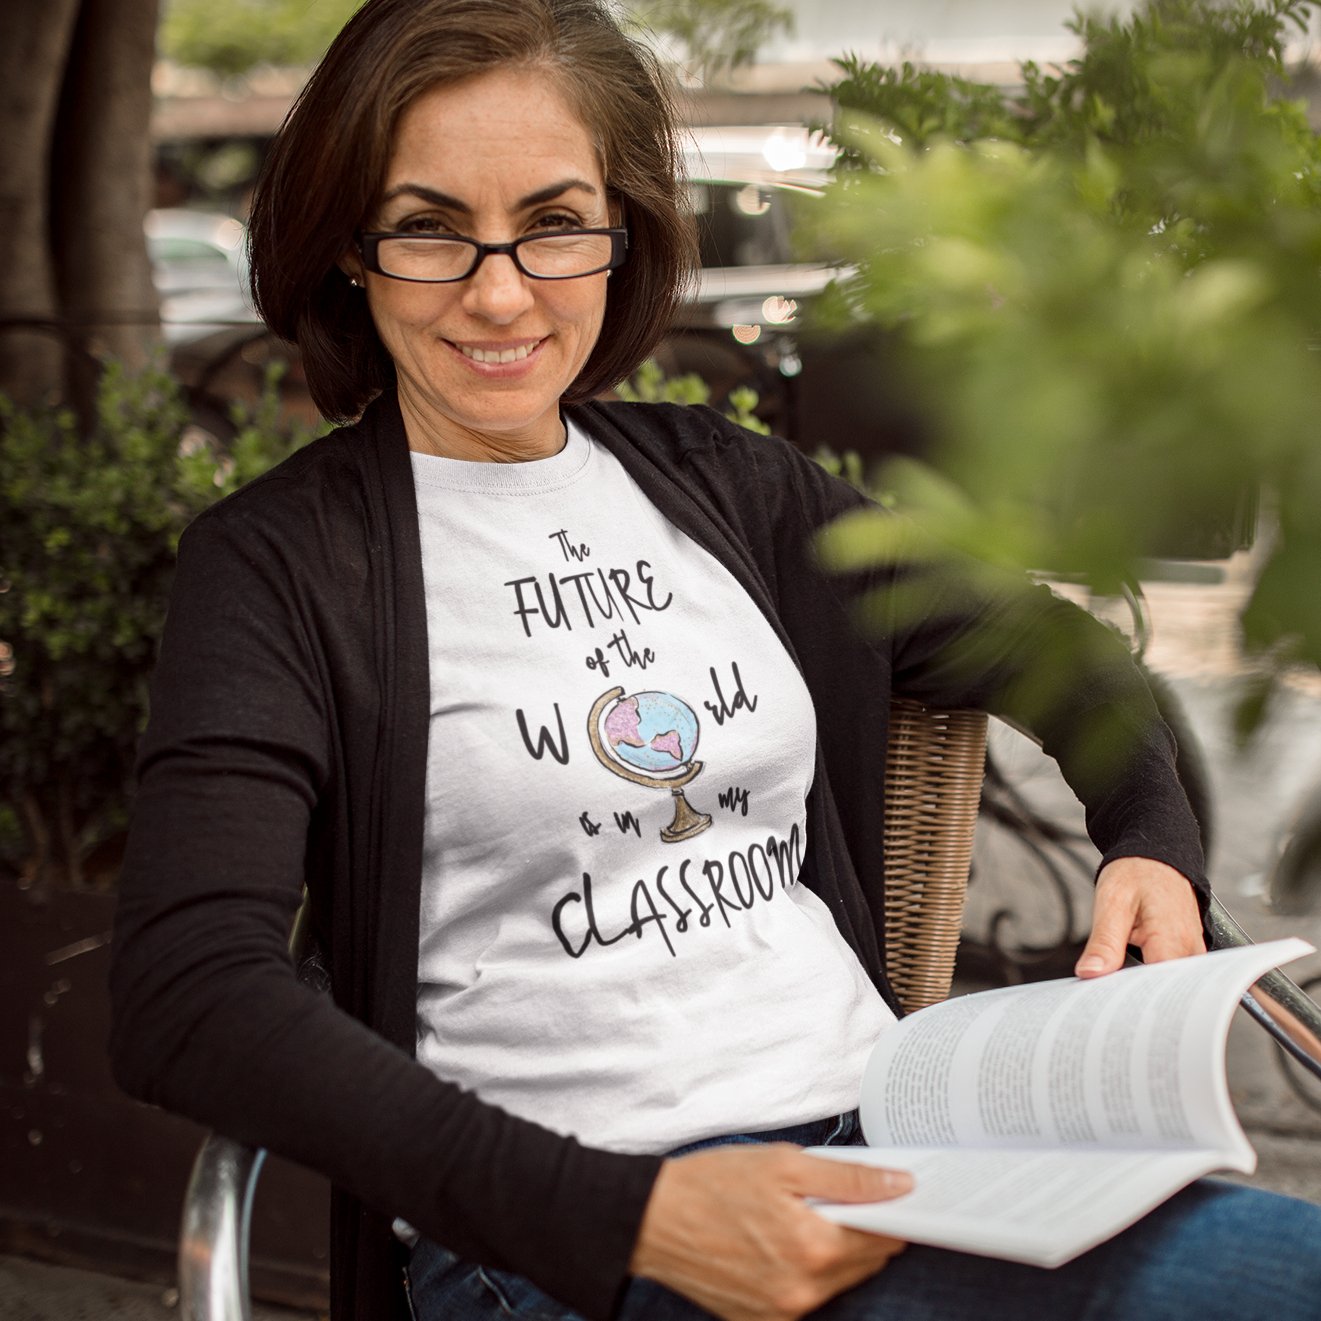 The Future of the World Is in My Classroom: Empowering Educator T-shirt – Where Tomorrow Begins Today!